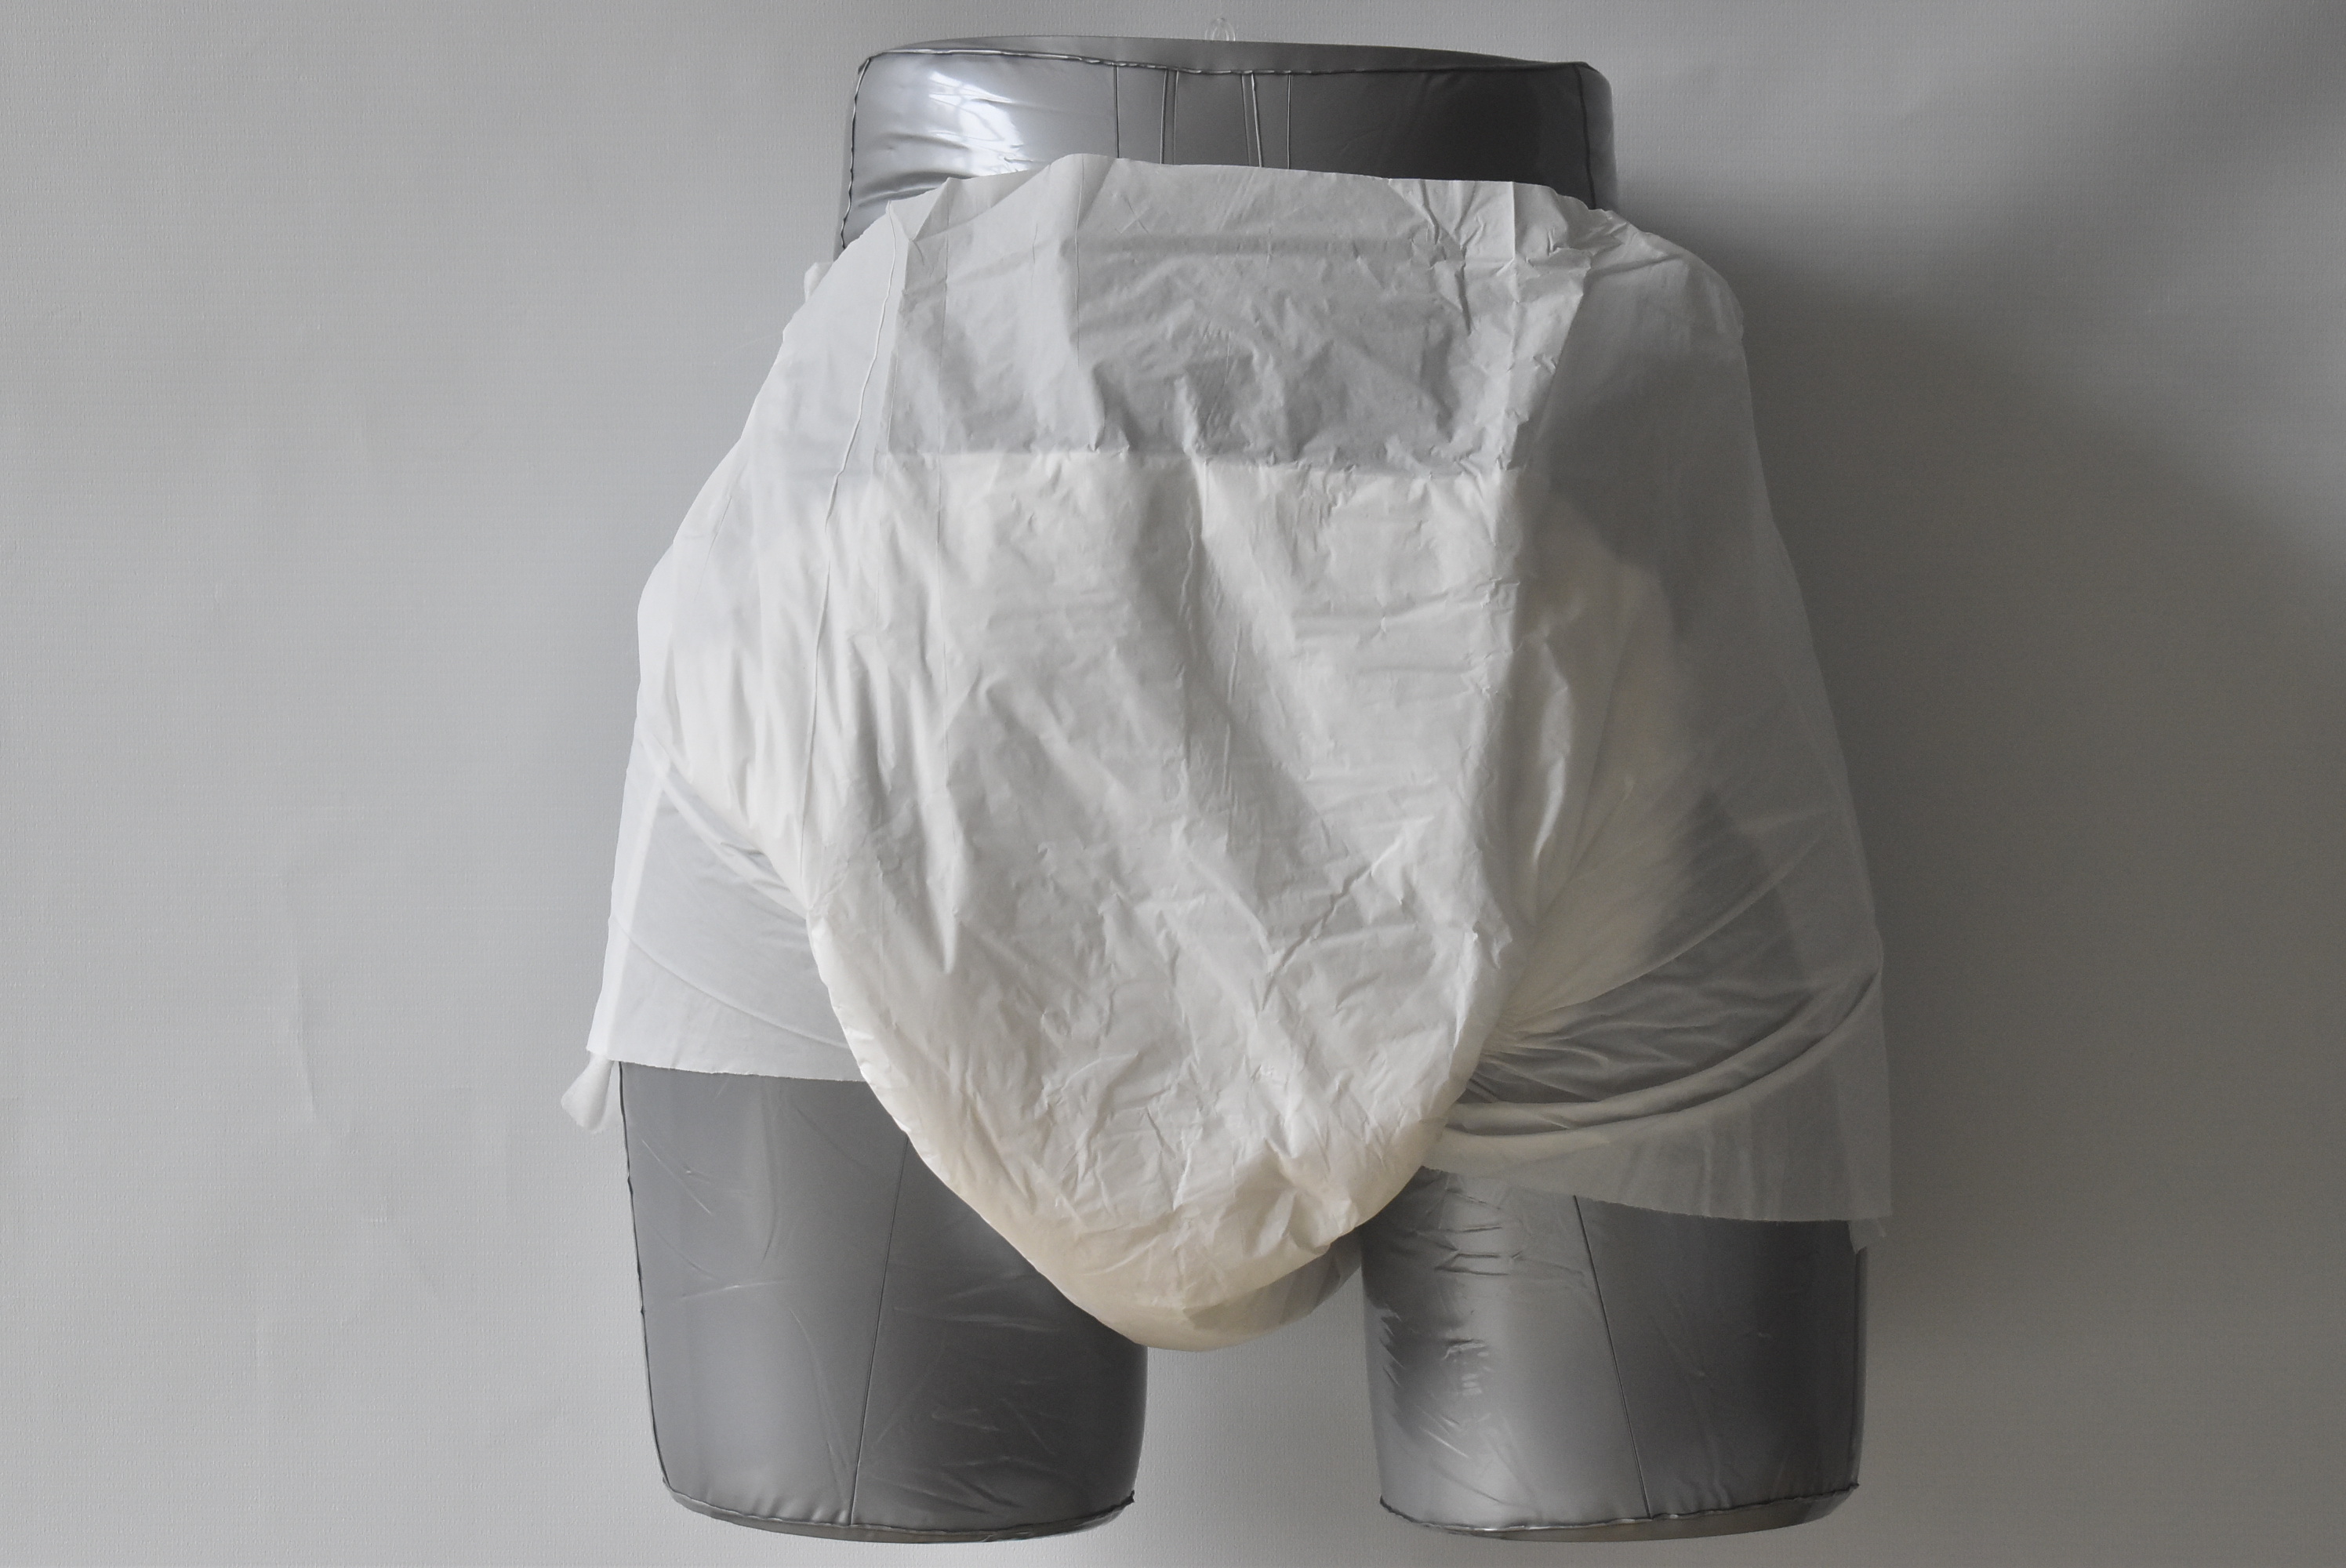 plastic diaper covers for adults, plastic diaper covers for adults  Suppliers and Manufacturers at